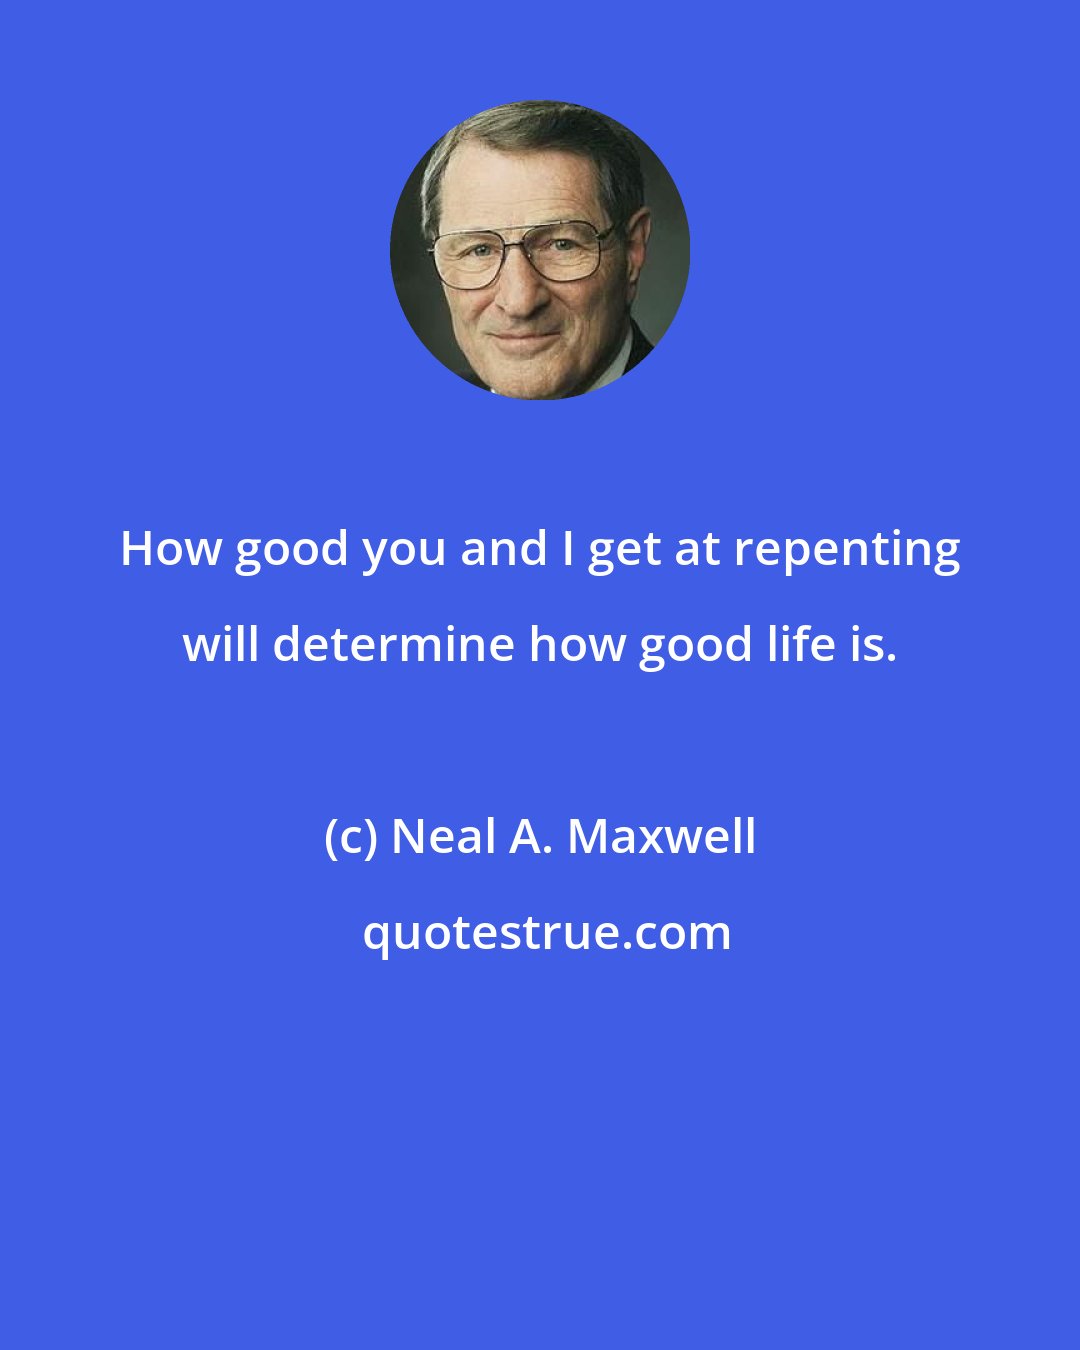 Neal A. Maxwell: How good you and I get at repenting will determine how good life is.